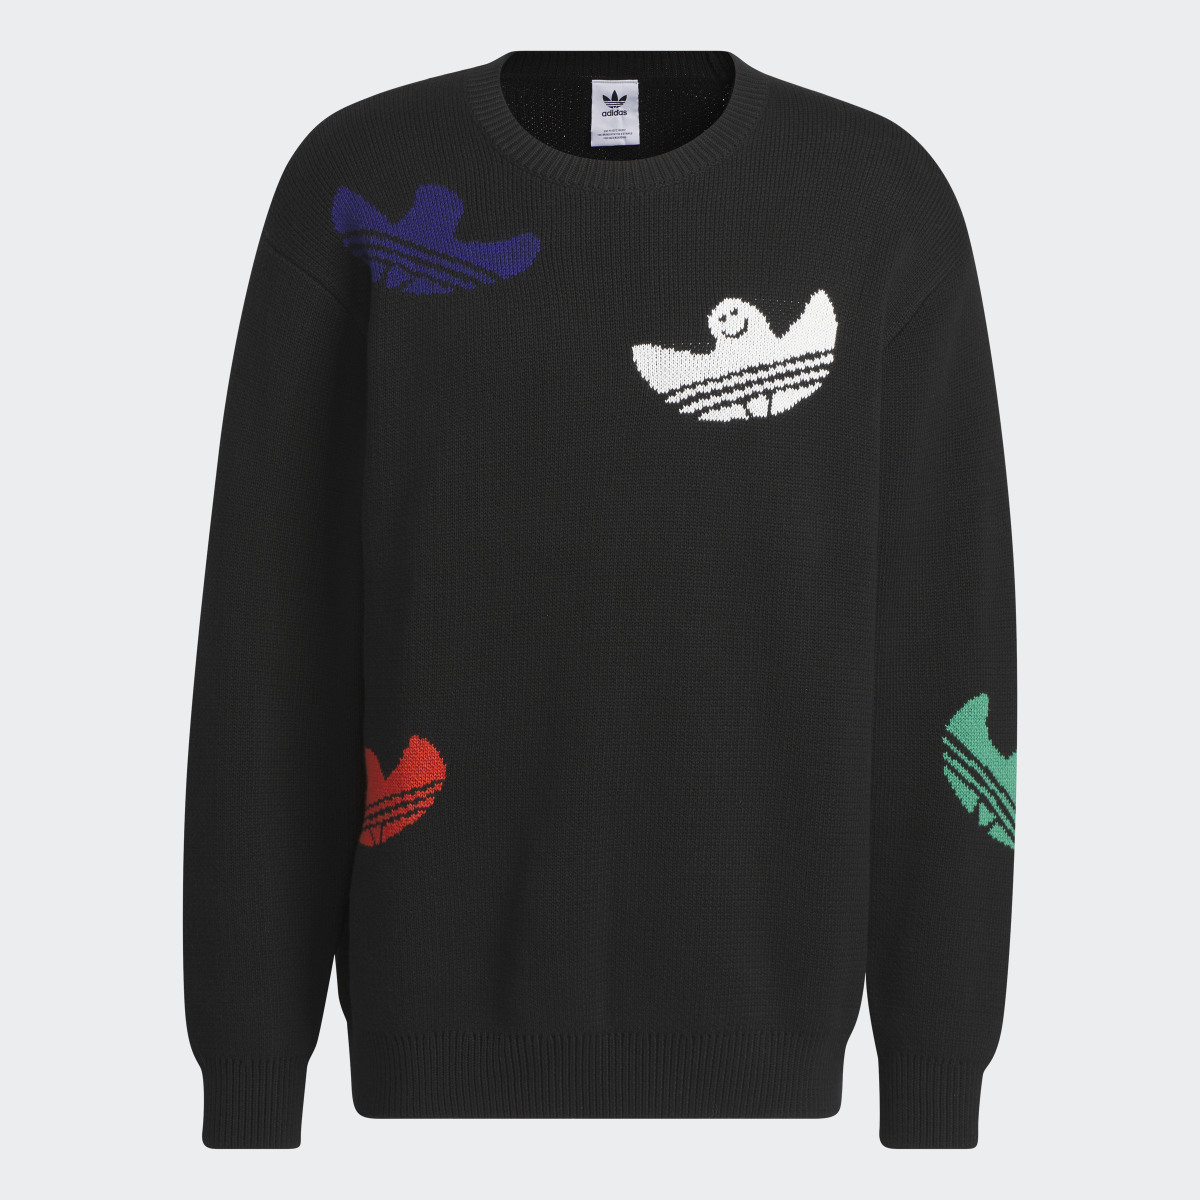 Adidas Shmoofoil Knit Sweater (Gender Neutral). 5